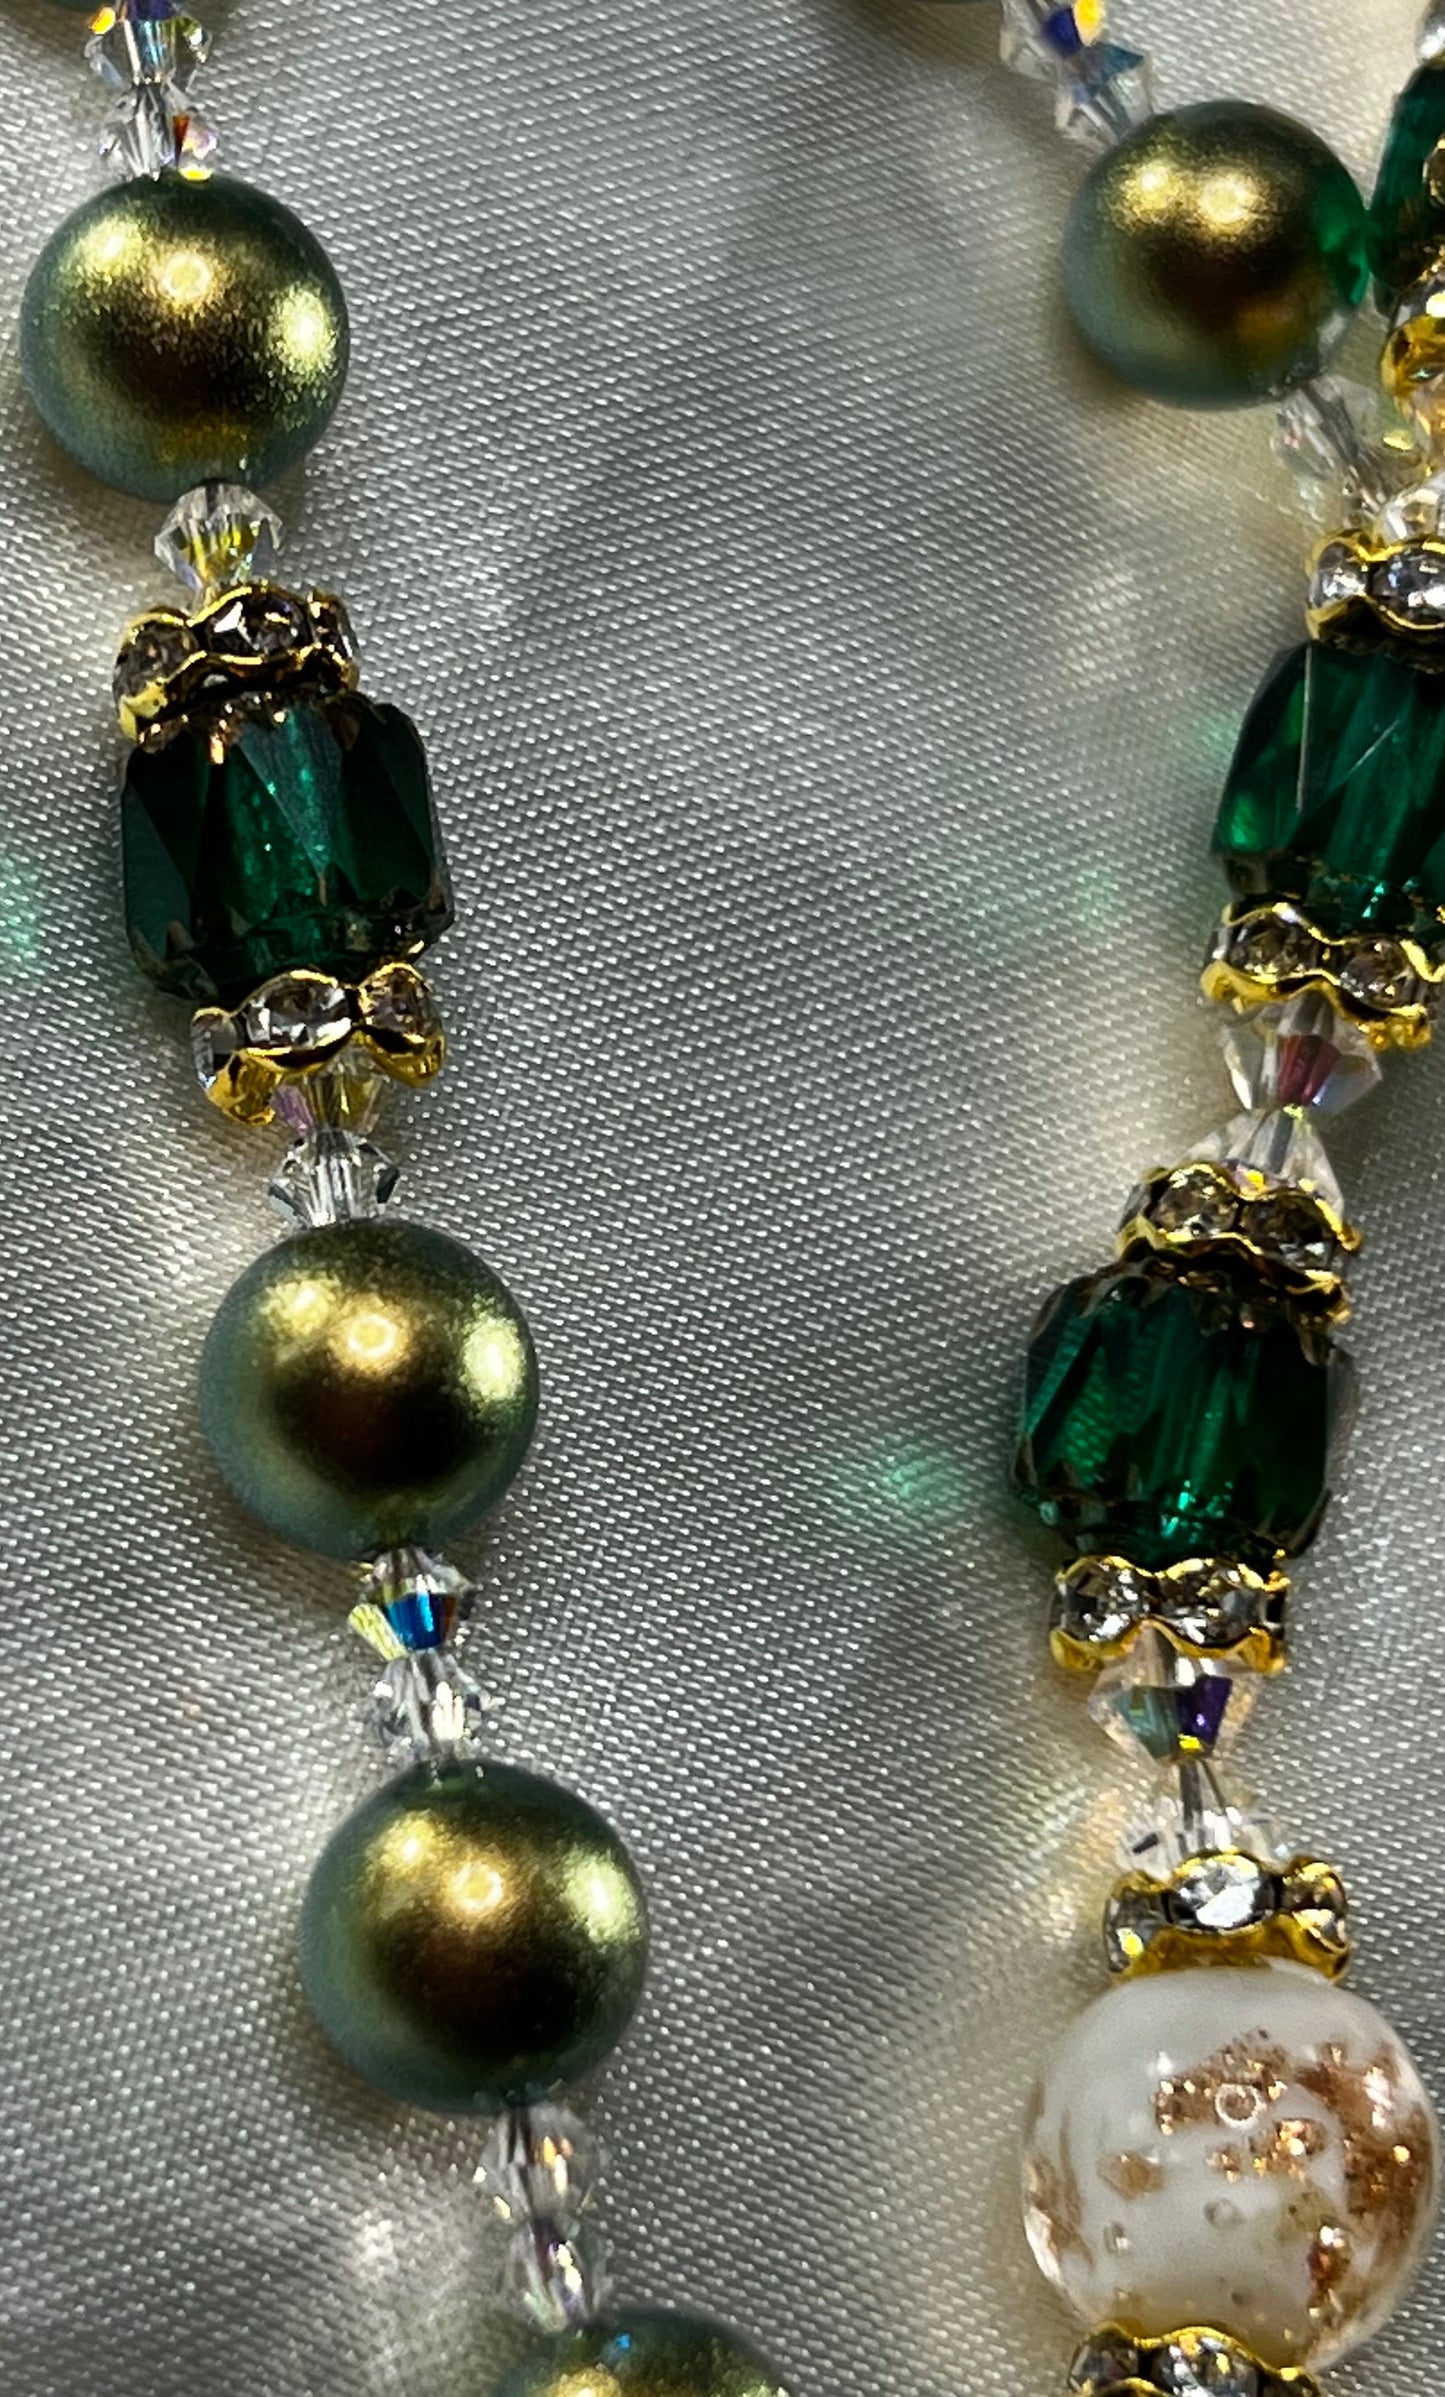 Beautiful Iridescent Green Swarovski Pearl beads, with Emerald Green Cathedral beads & Swarovski Crystal spacers.